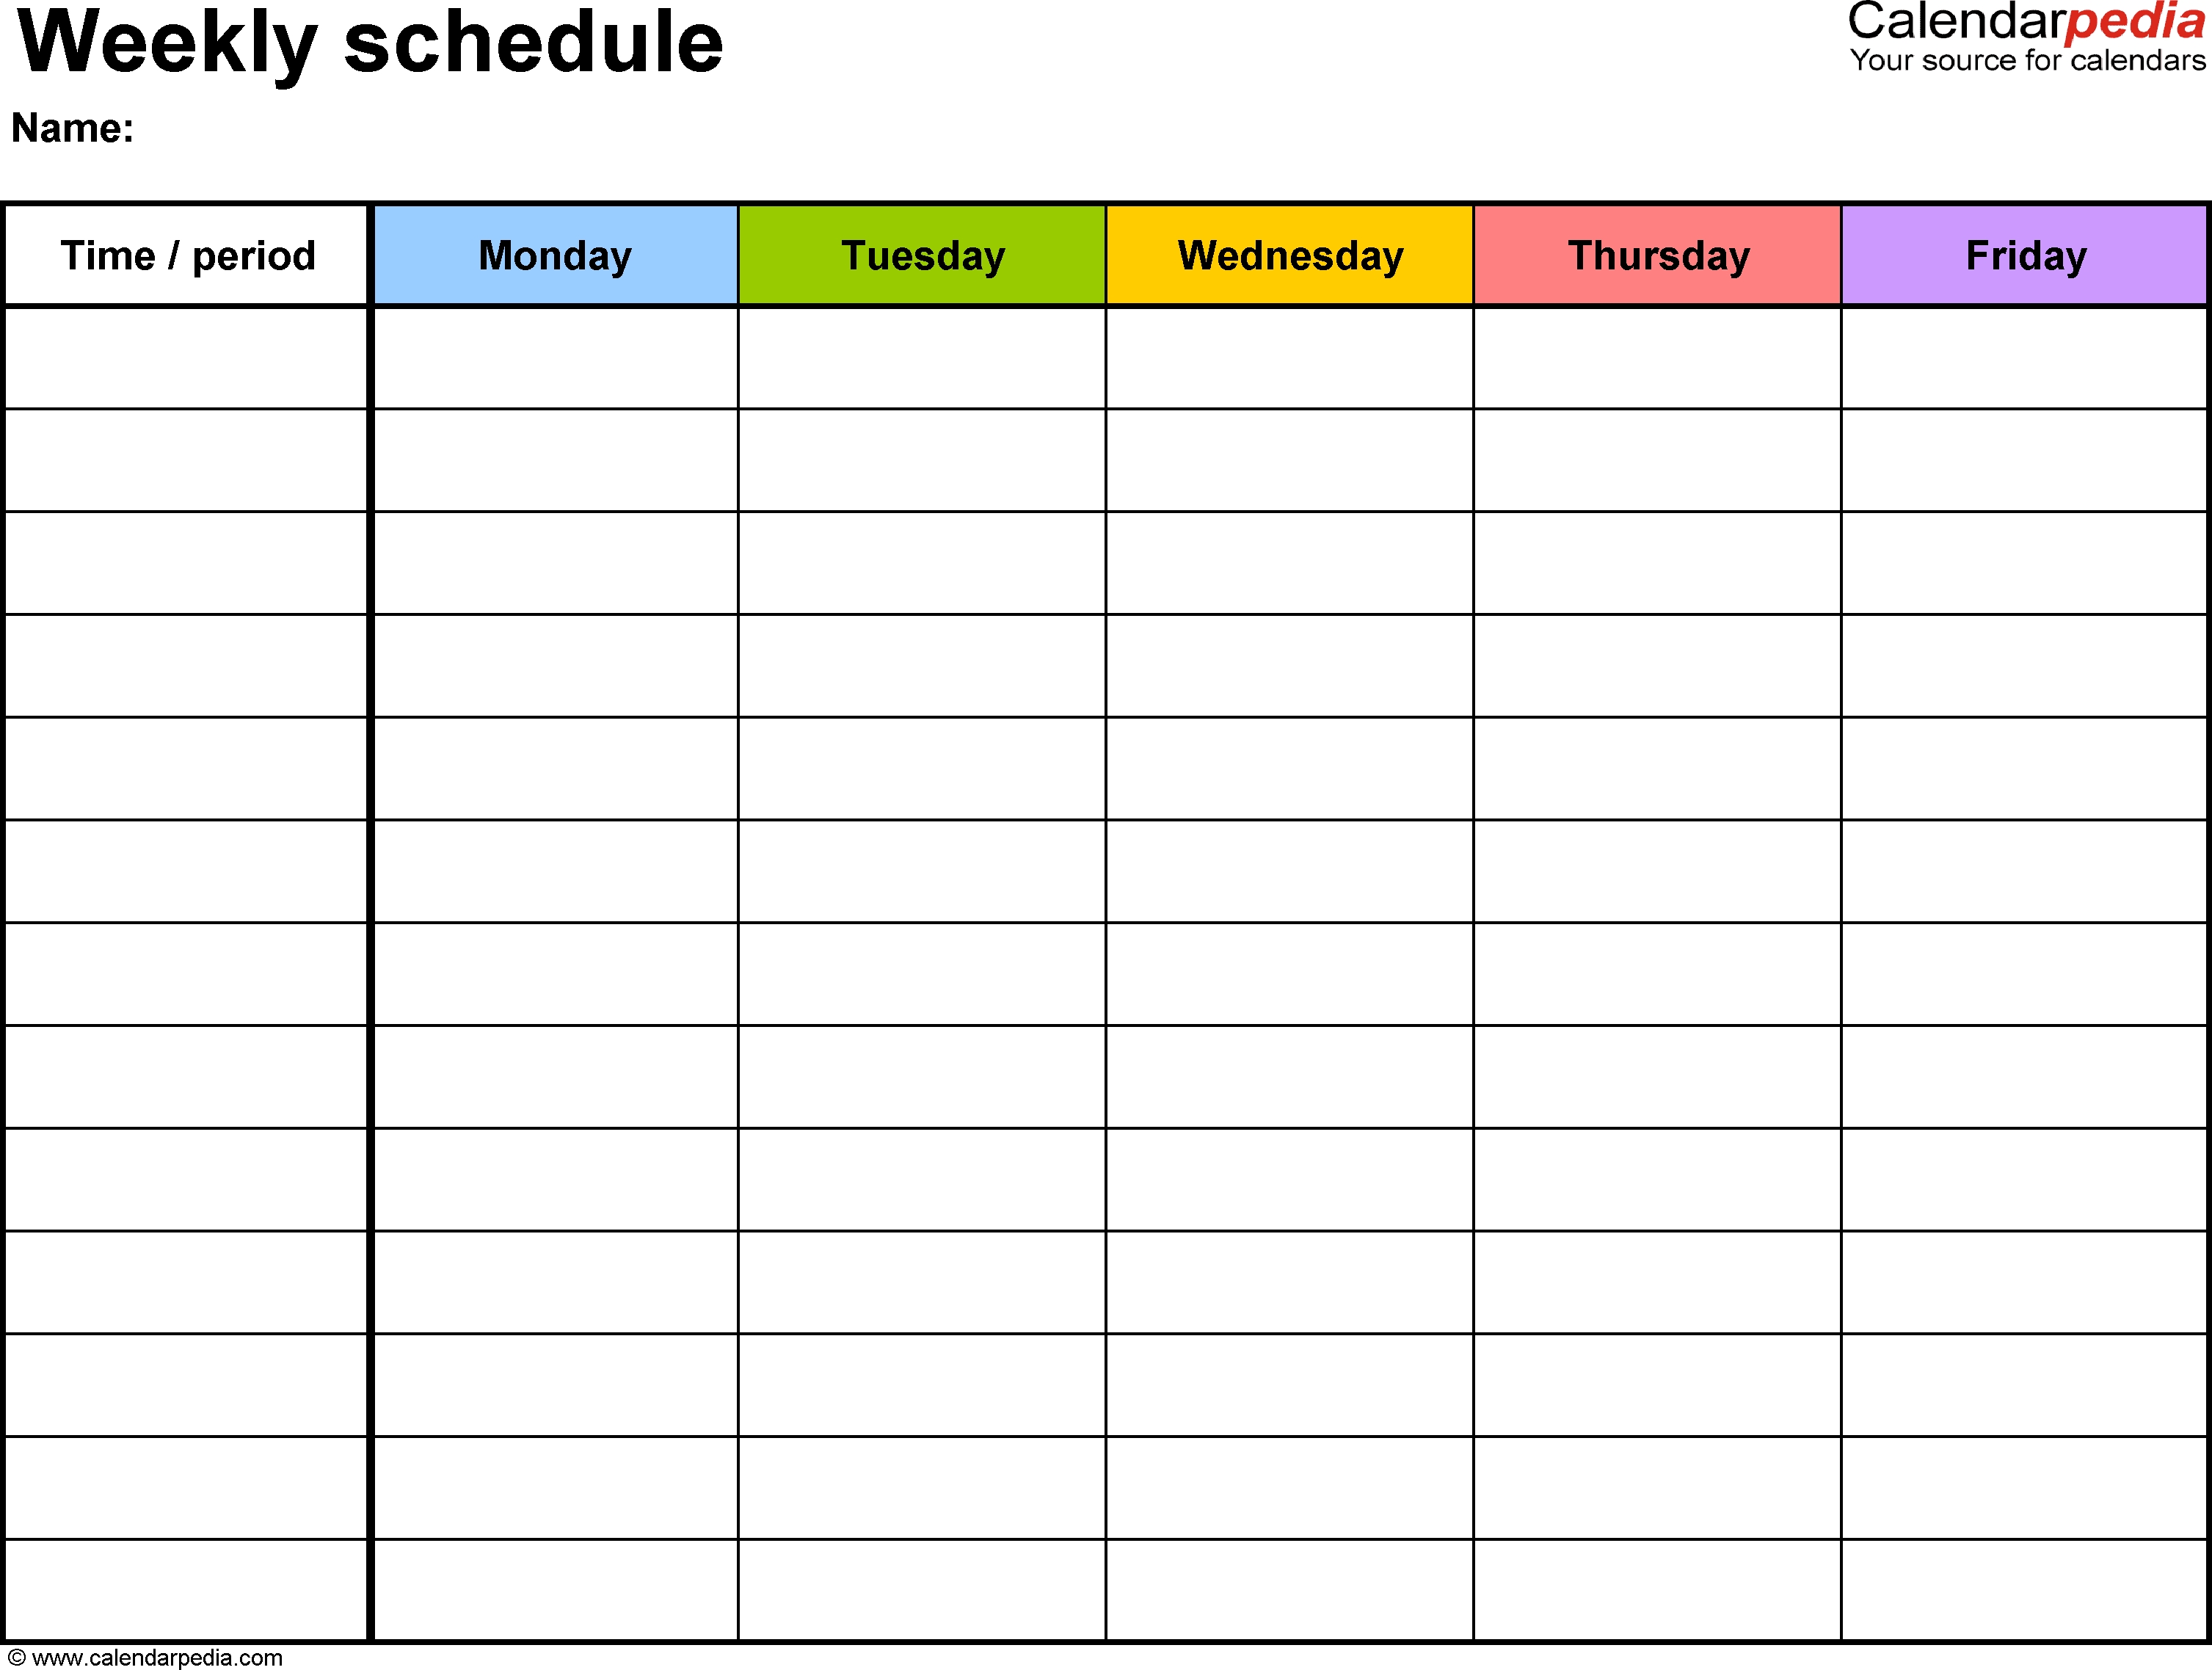 Free Weekly Schedule Templates For Word - 18 Templates intended for Weekly Calendar Template With Times